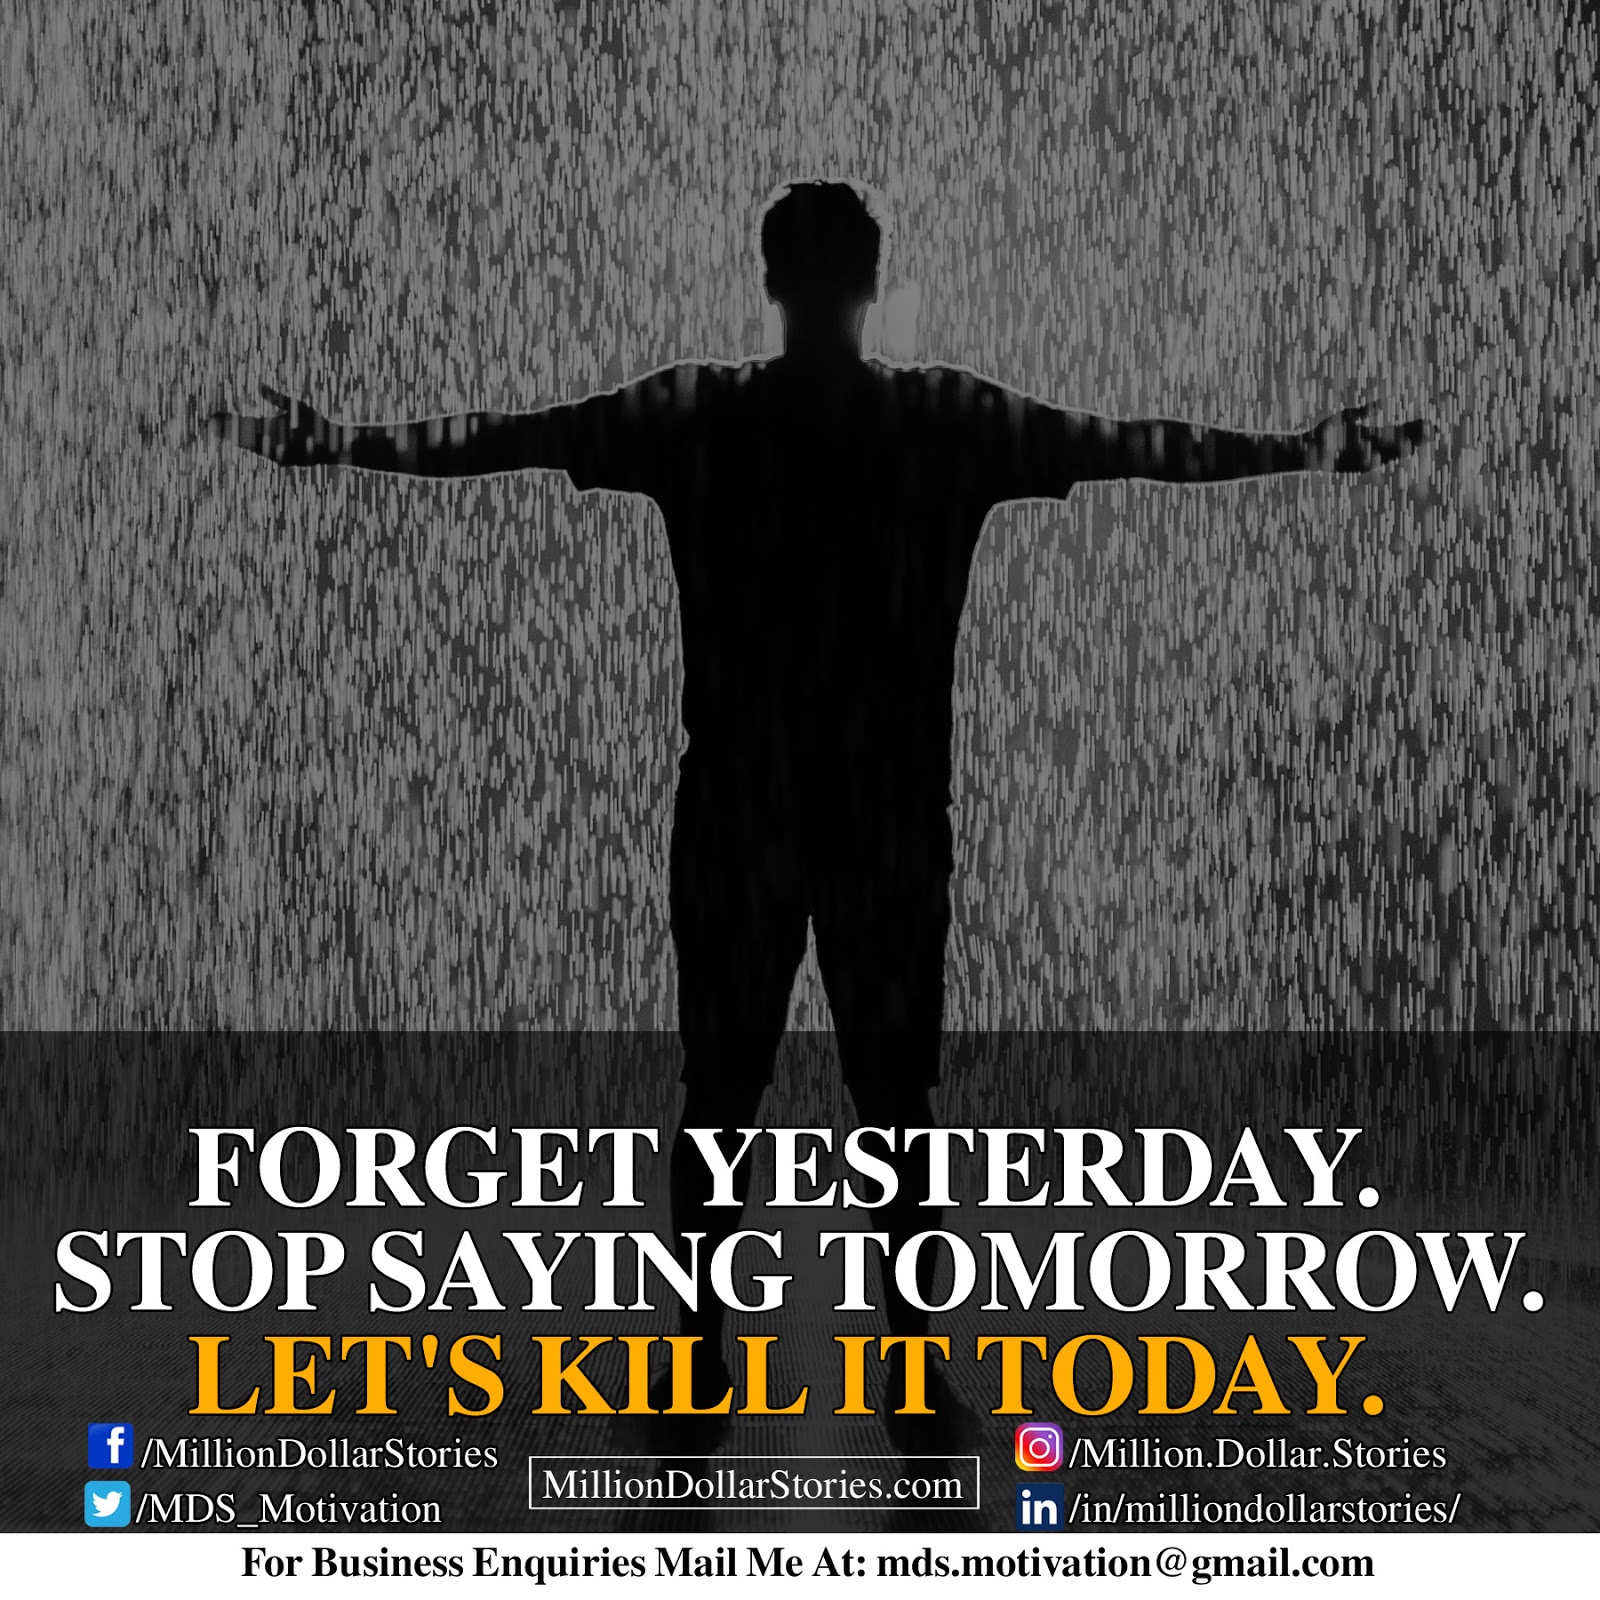 FORGET YESTERDAY. STOP SAYING TOMORROW. LET'S KILL IT TODAY.